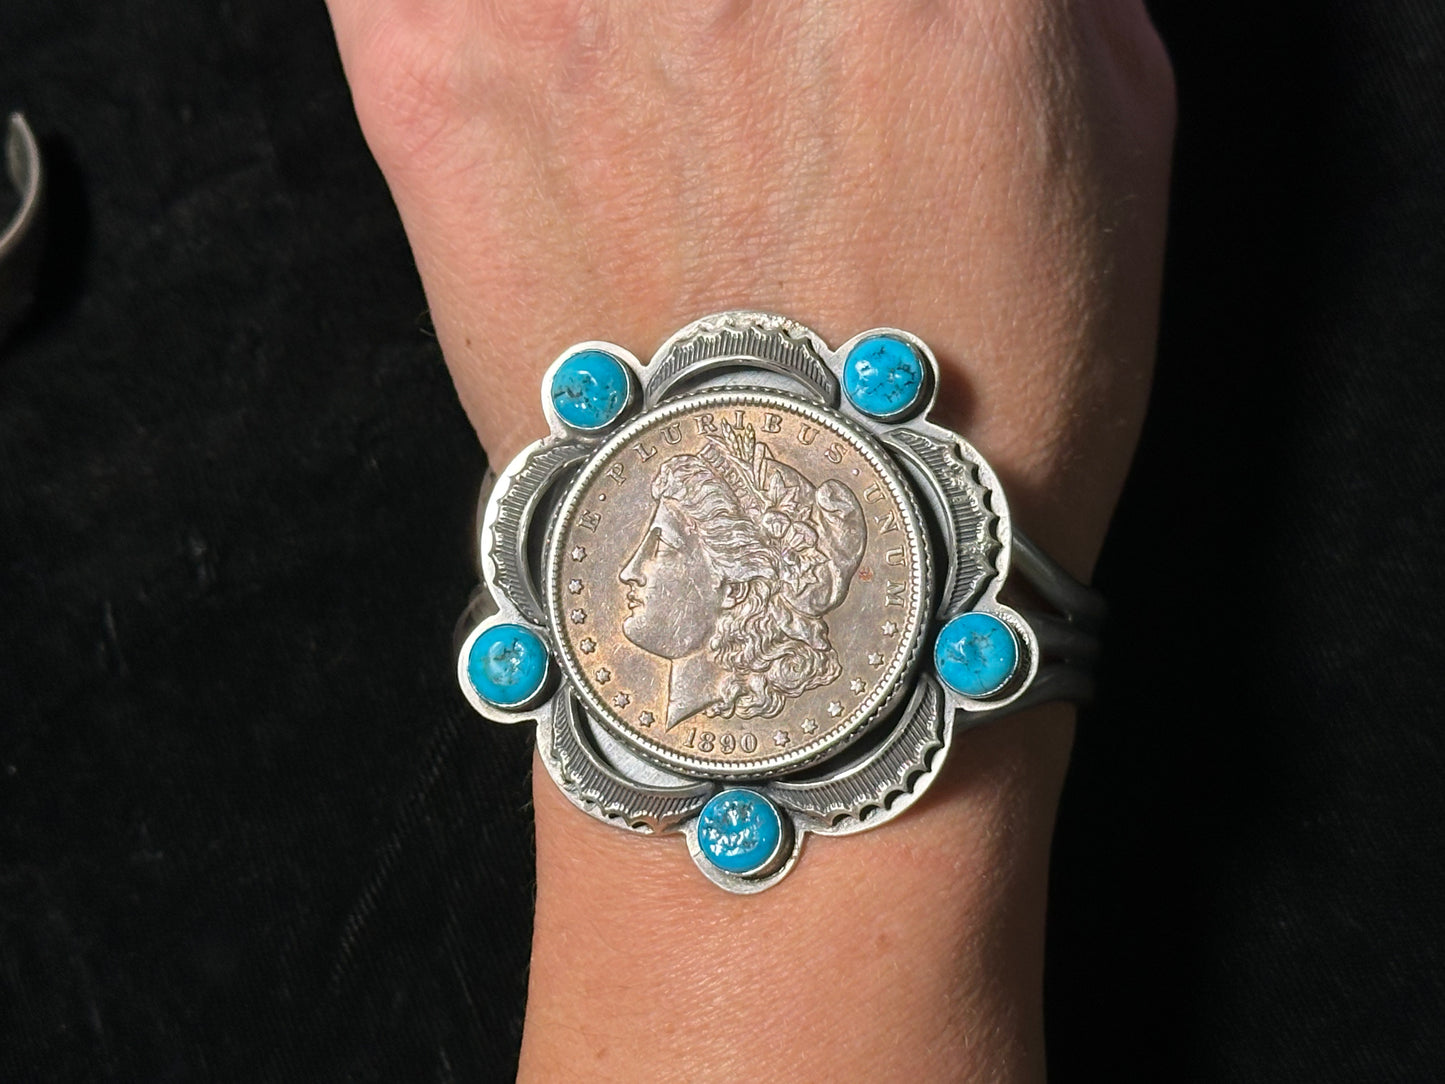 6"-7" 1890 Morgan Silver Dollar and Sleeping Beauty Turquoise Cuff Bracelet